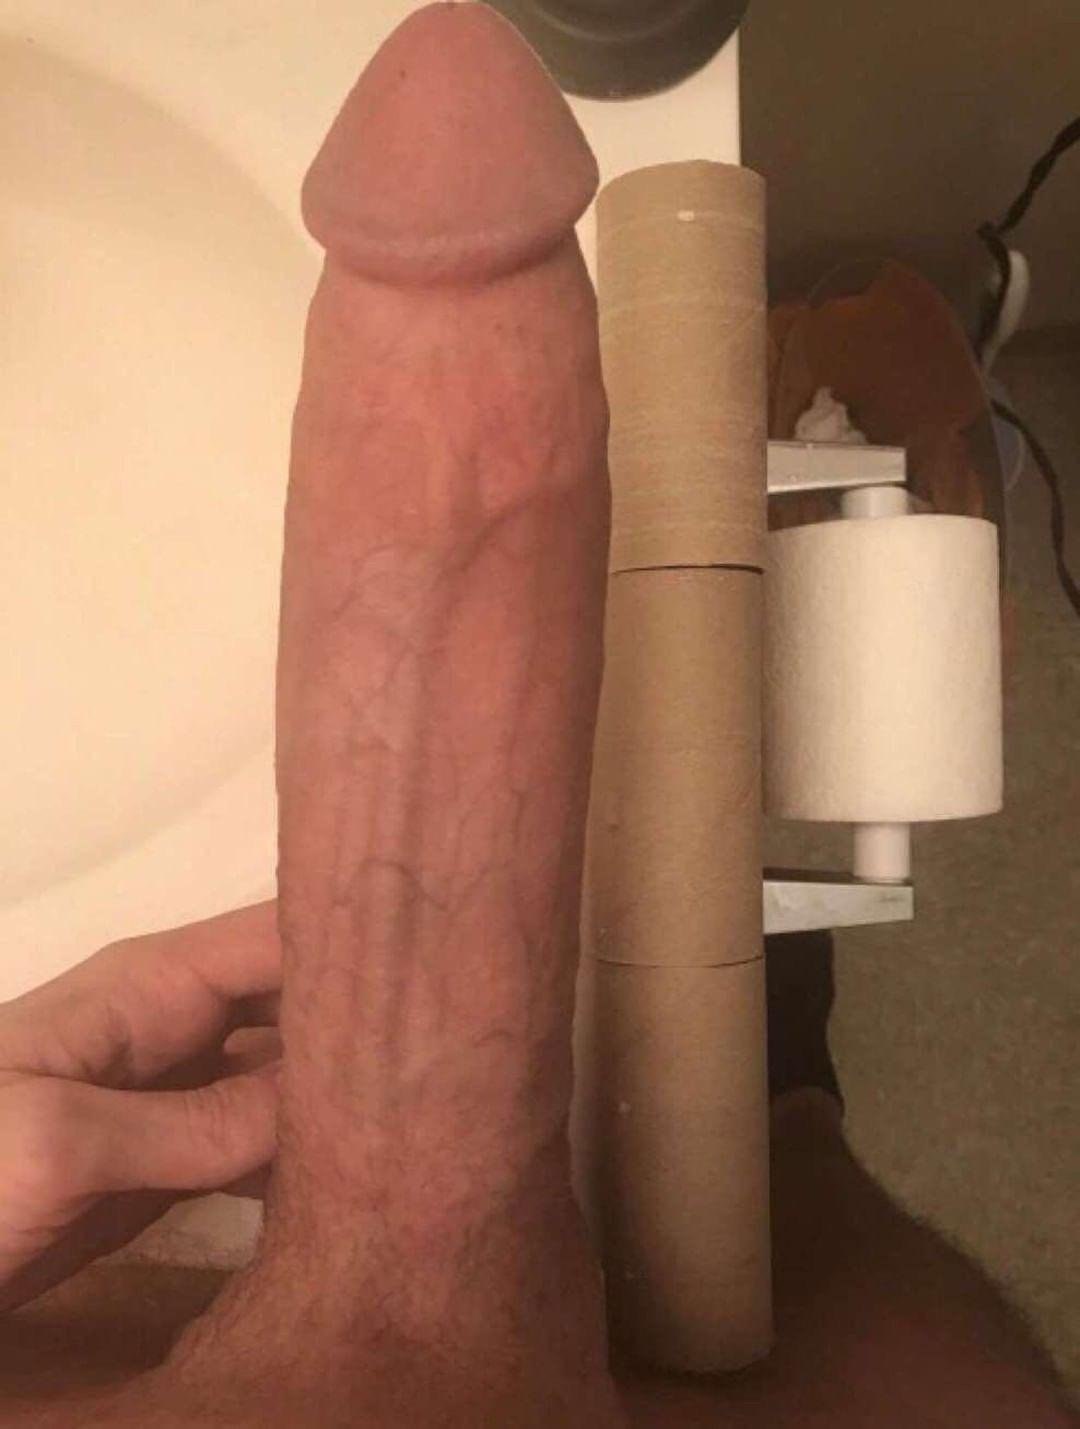 12 Inch Penis Porn Videos ❤️ Best adult photos at thesexy.es